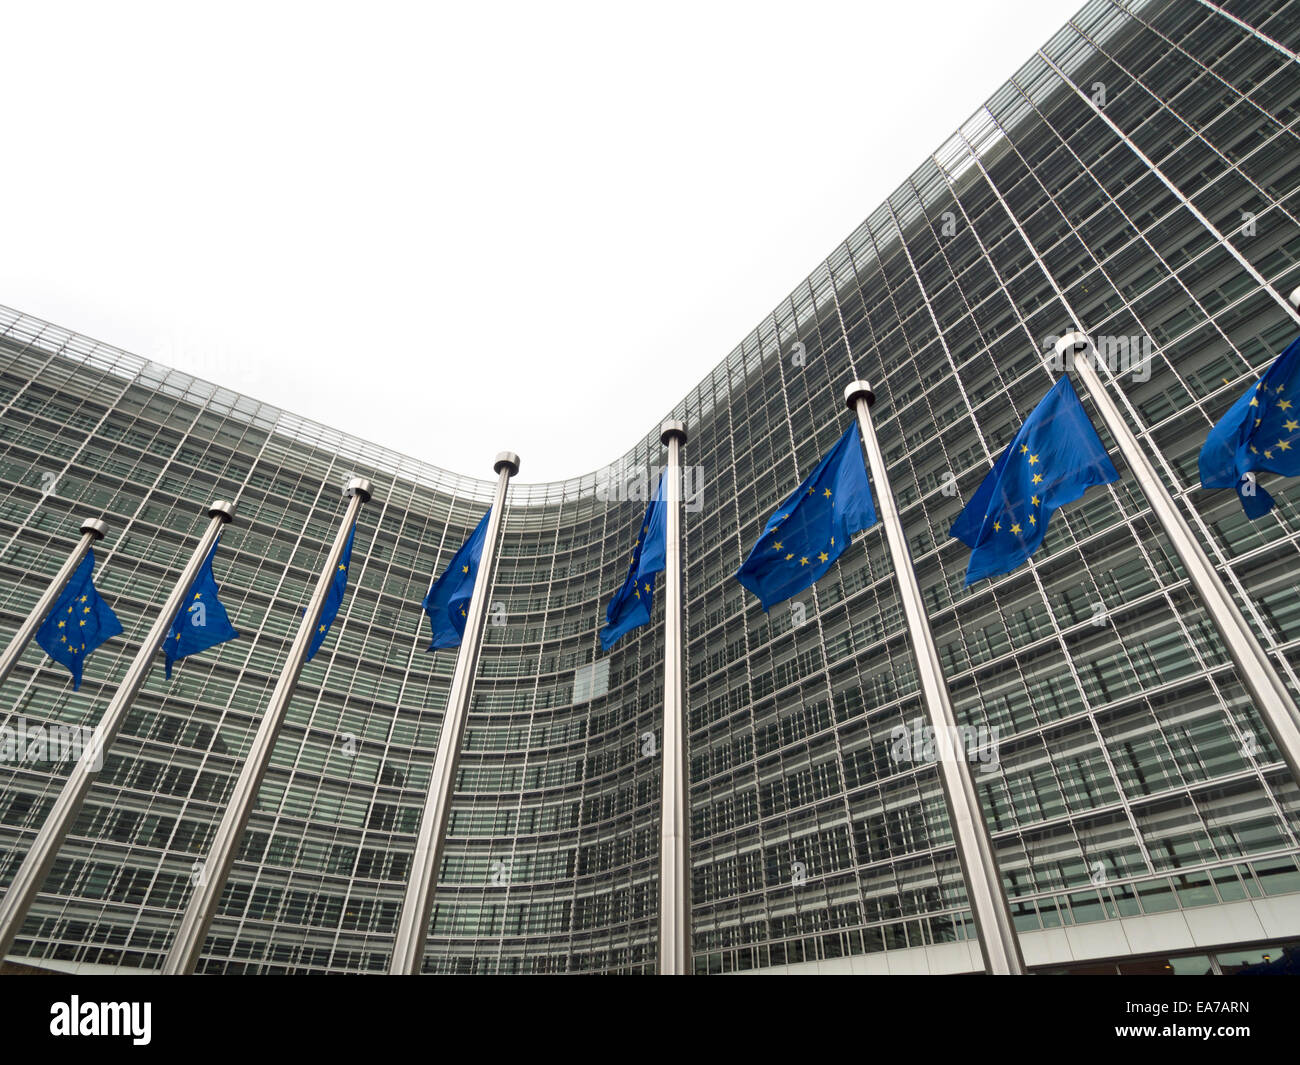 European Union flags in front of the Berlaymont building, headquarters of the European commission in Brussels, Belgium, Europe Stock Photo